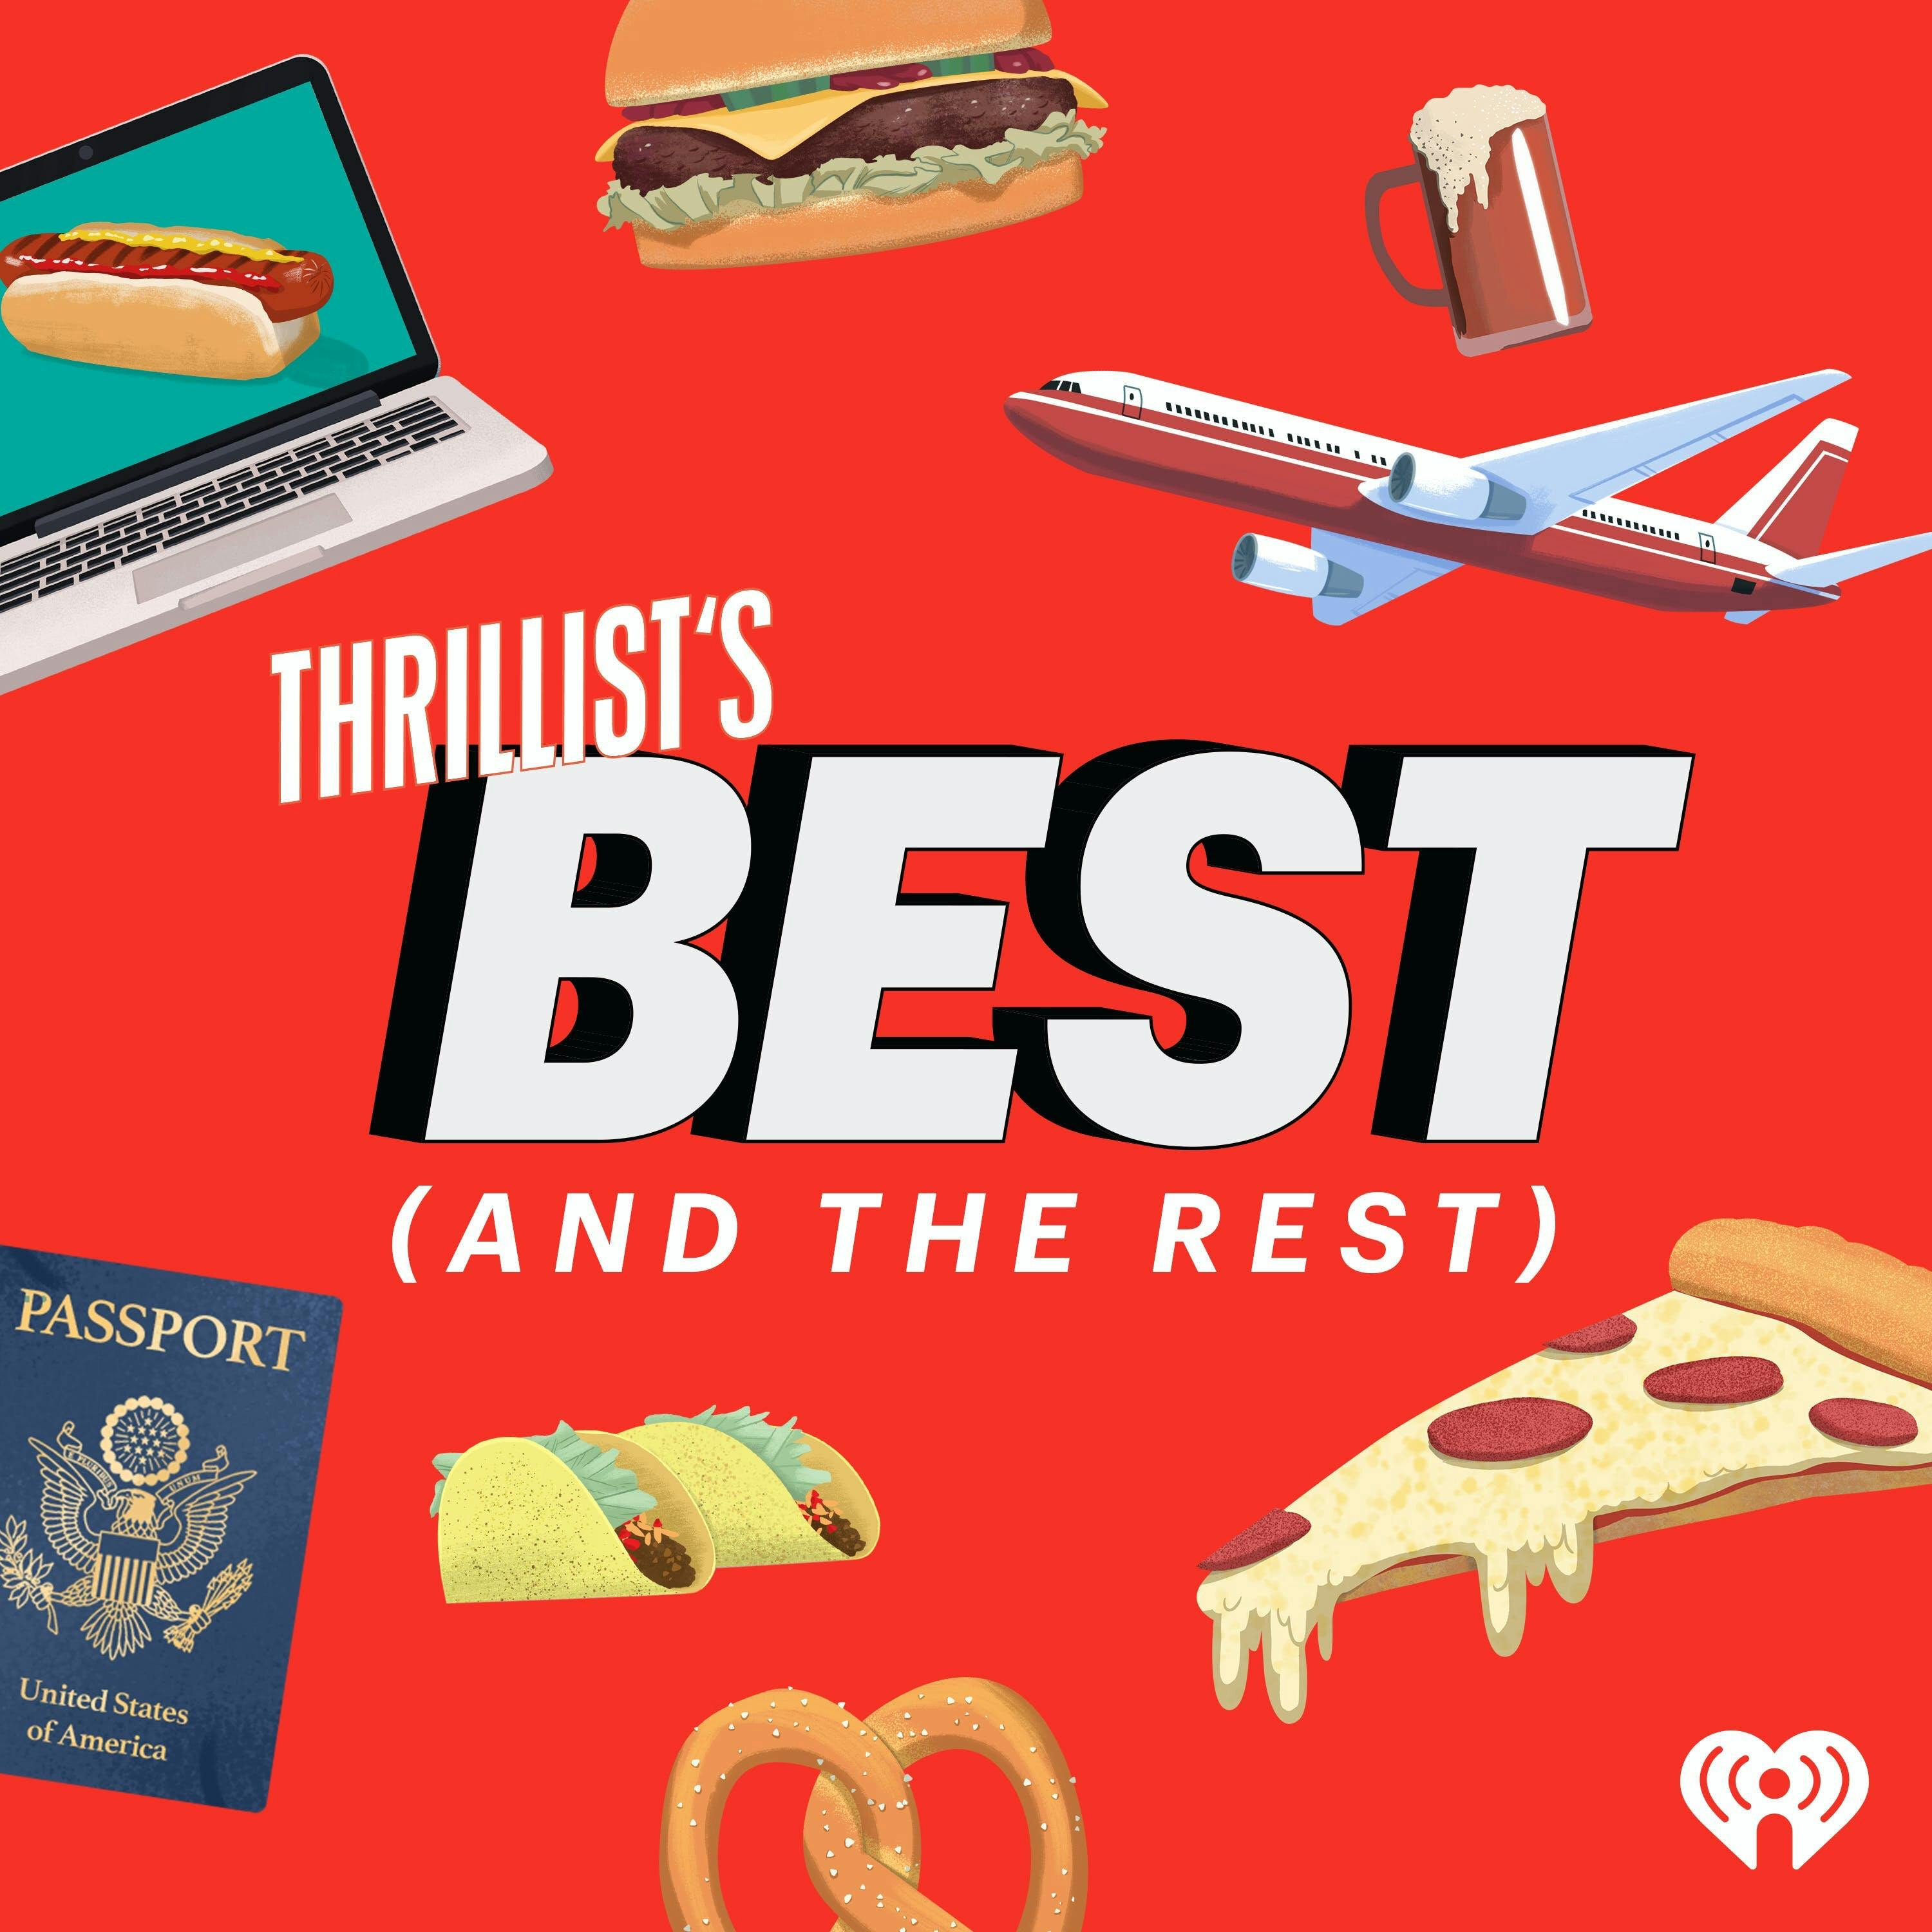 THRILLIST’S BEST: In 2020, It’s All About Simplicity